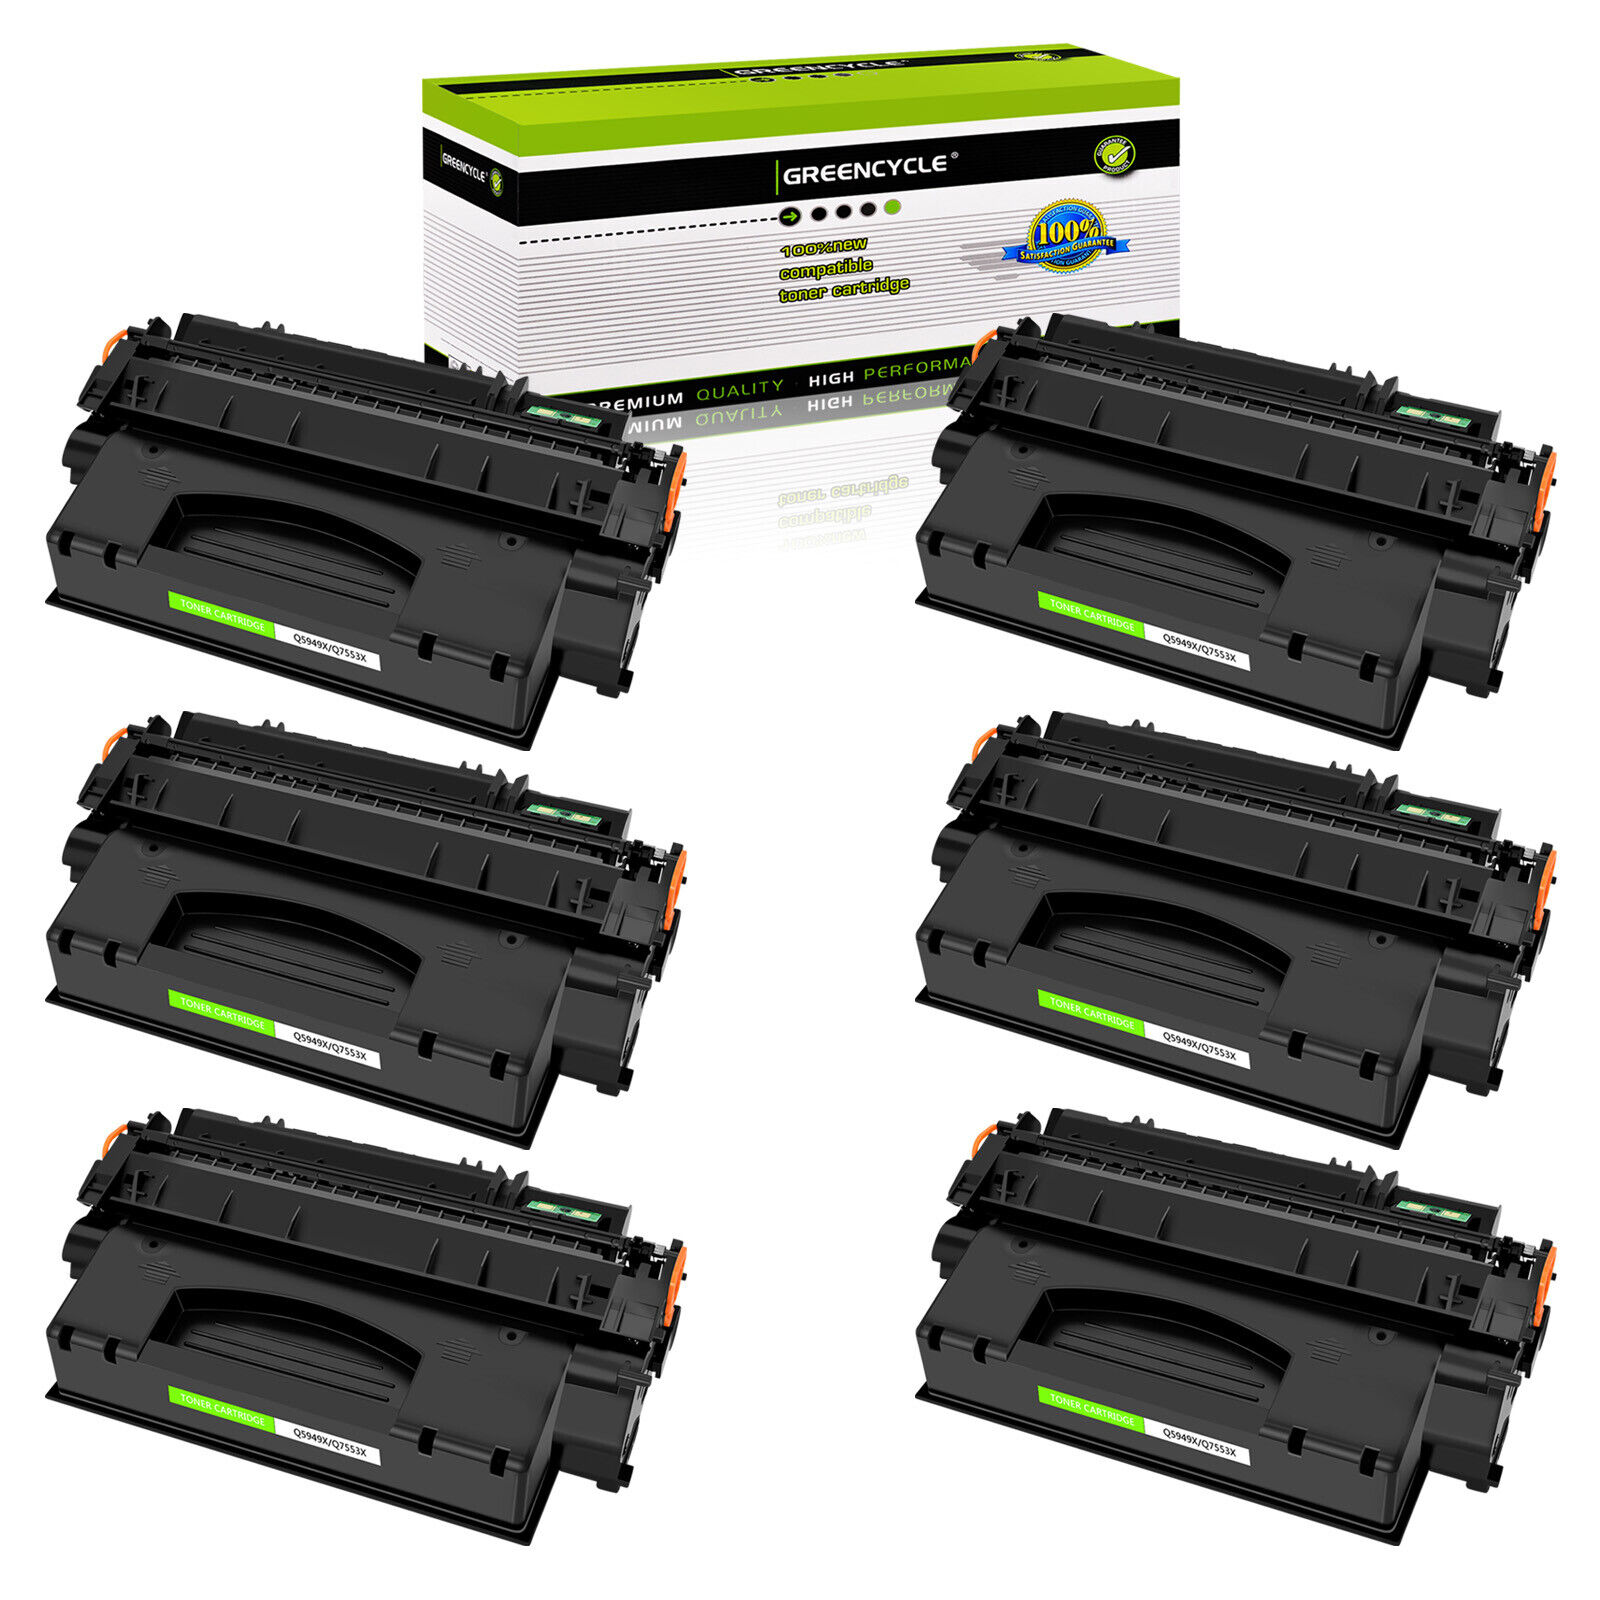 GREENCYCLE 6× Q7553X 53X Toner fit for HP LaserJet P2014 P2015 M2727 MFP M2727nf